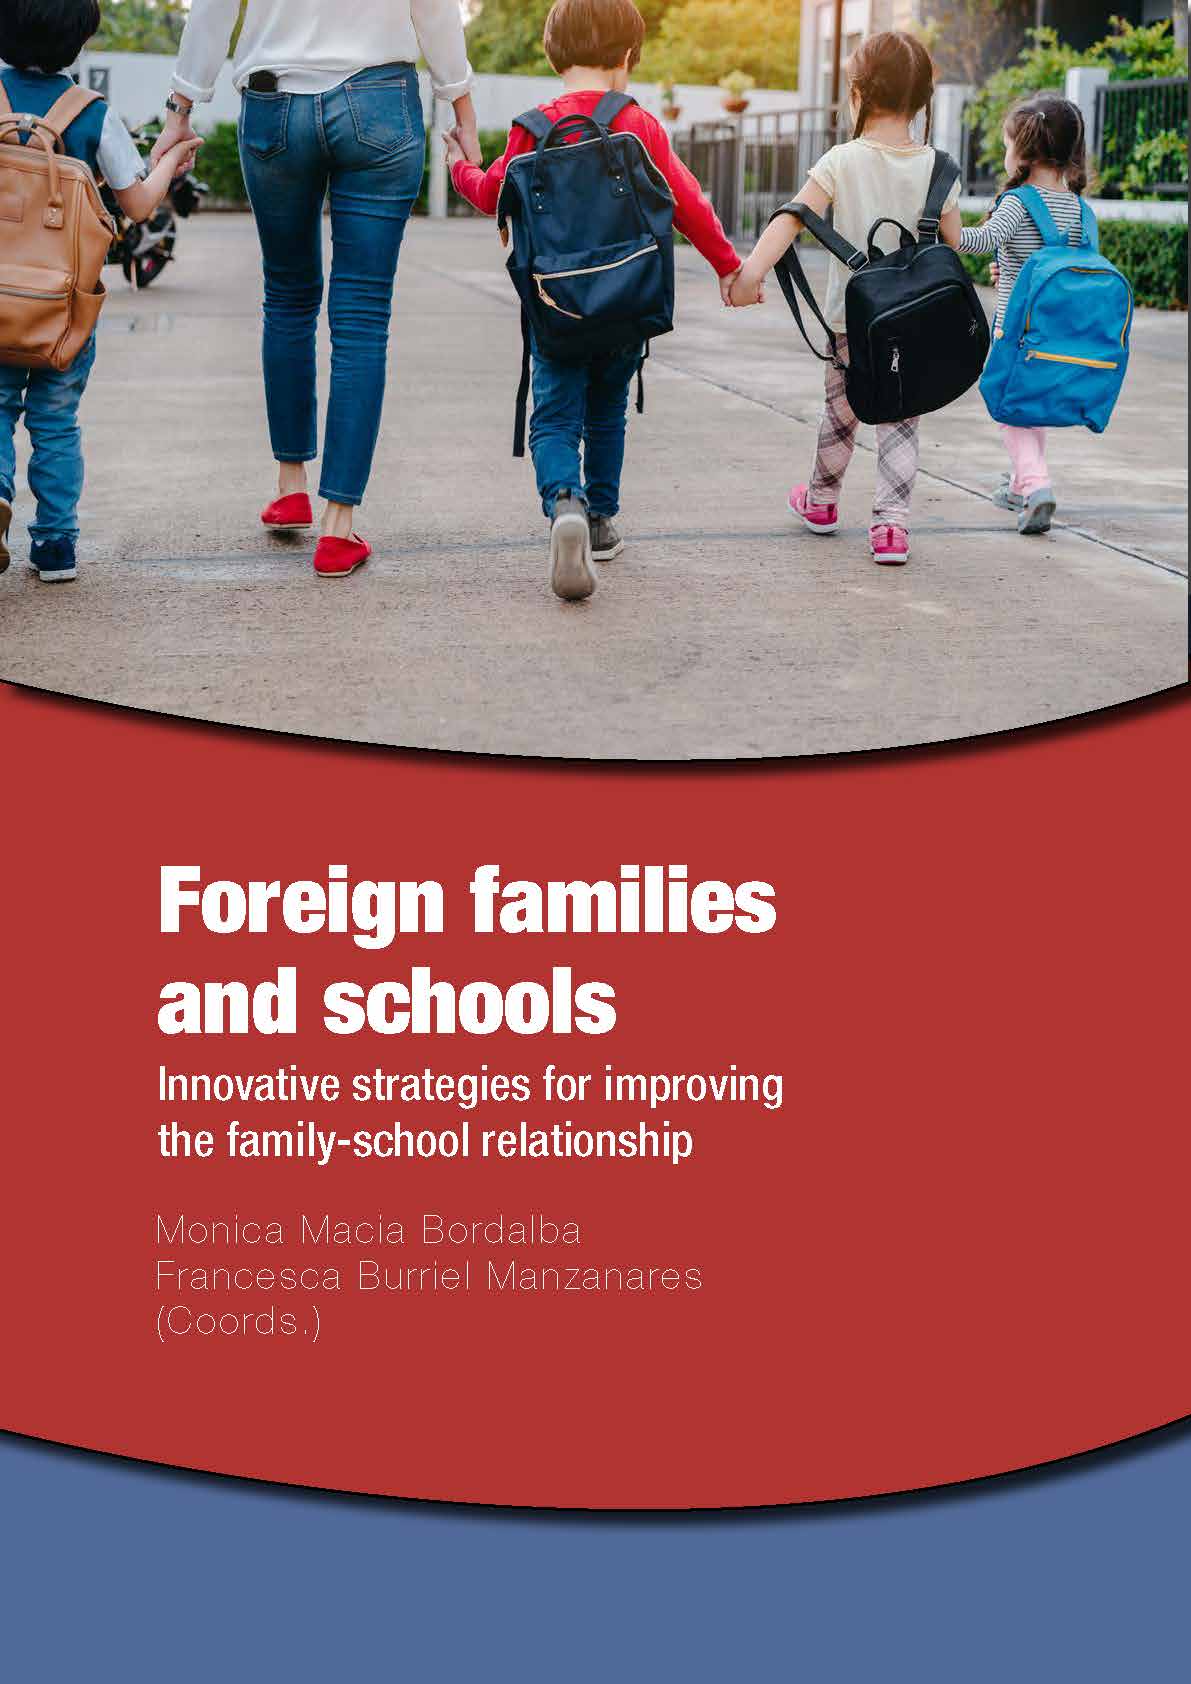 Foreign families and schools